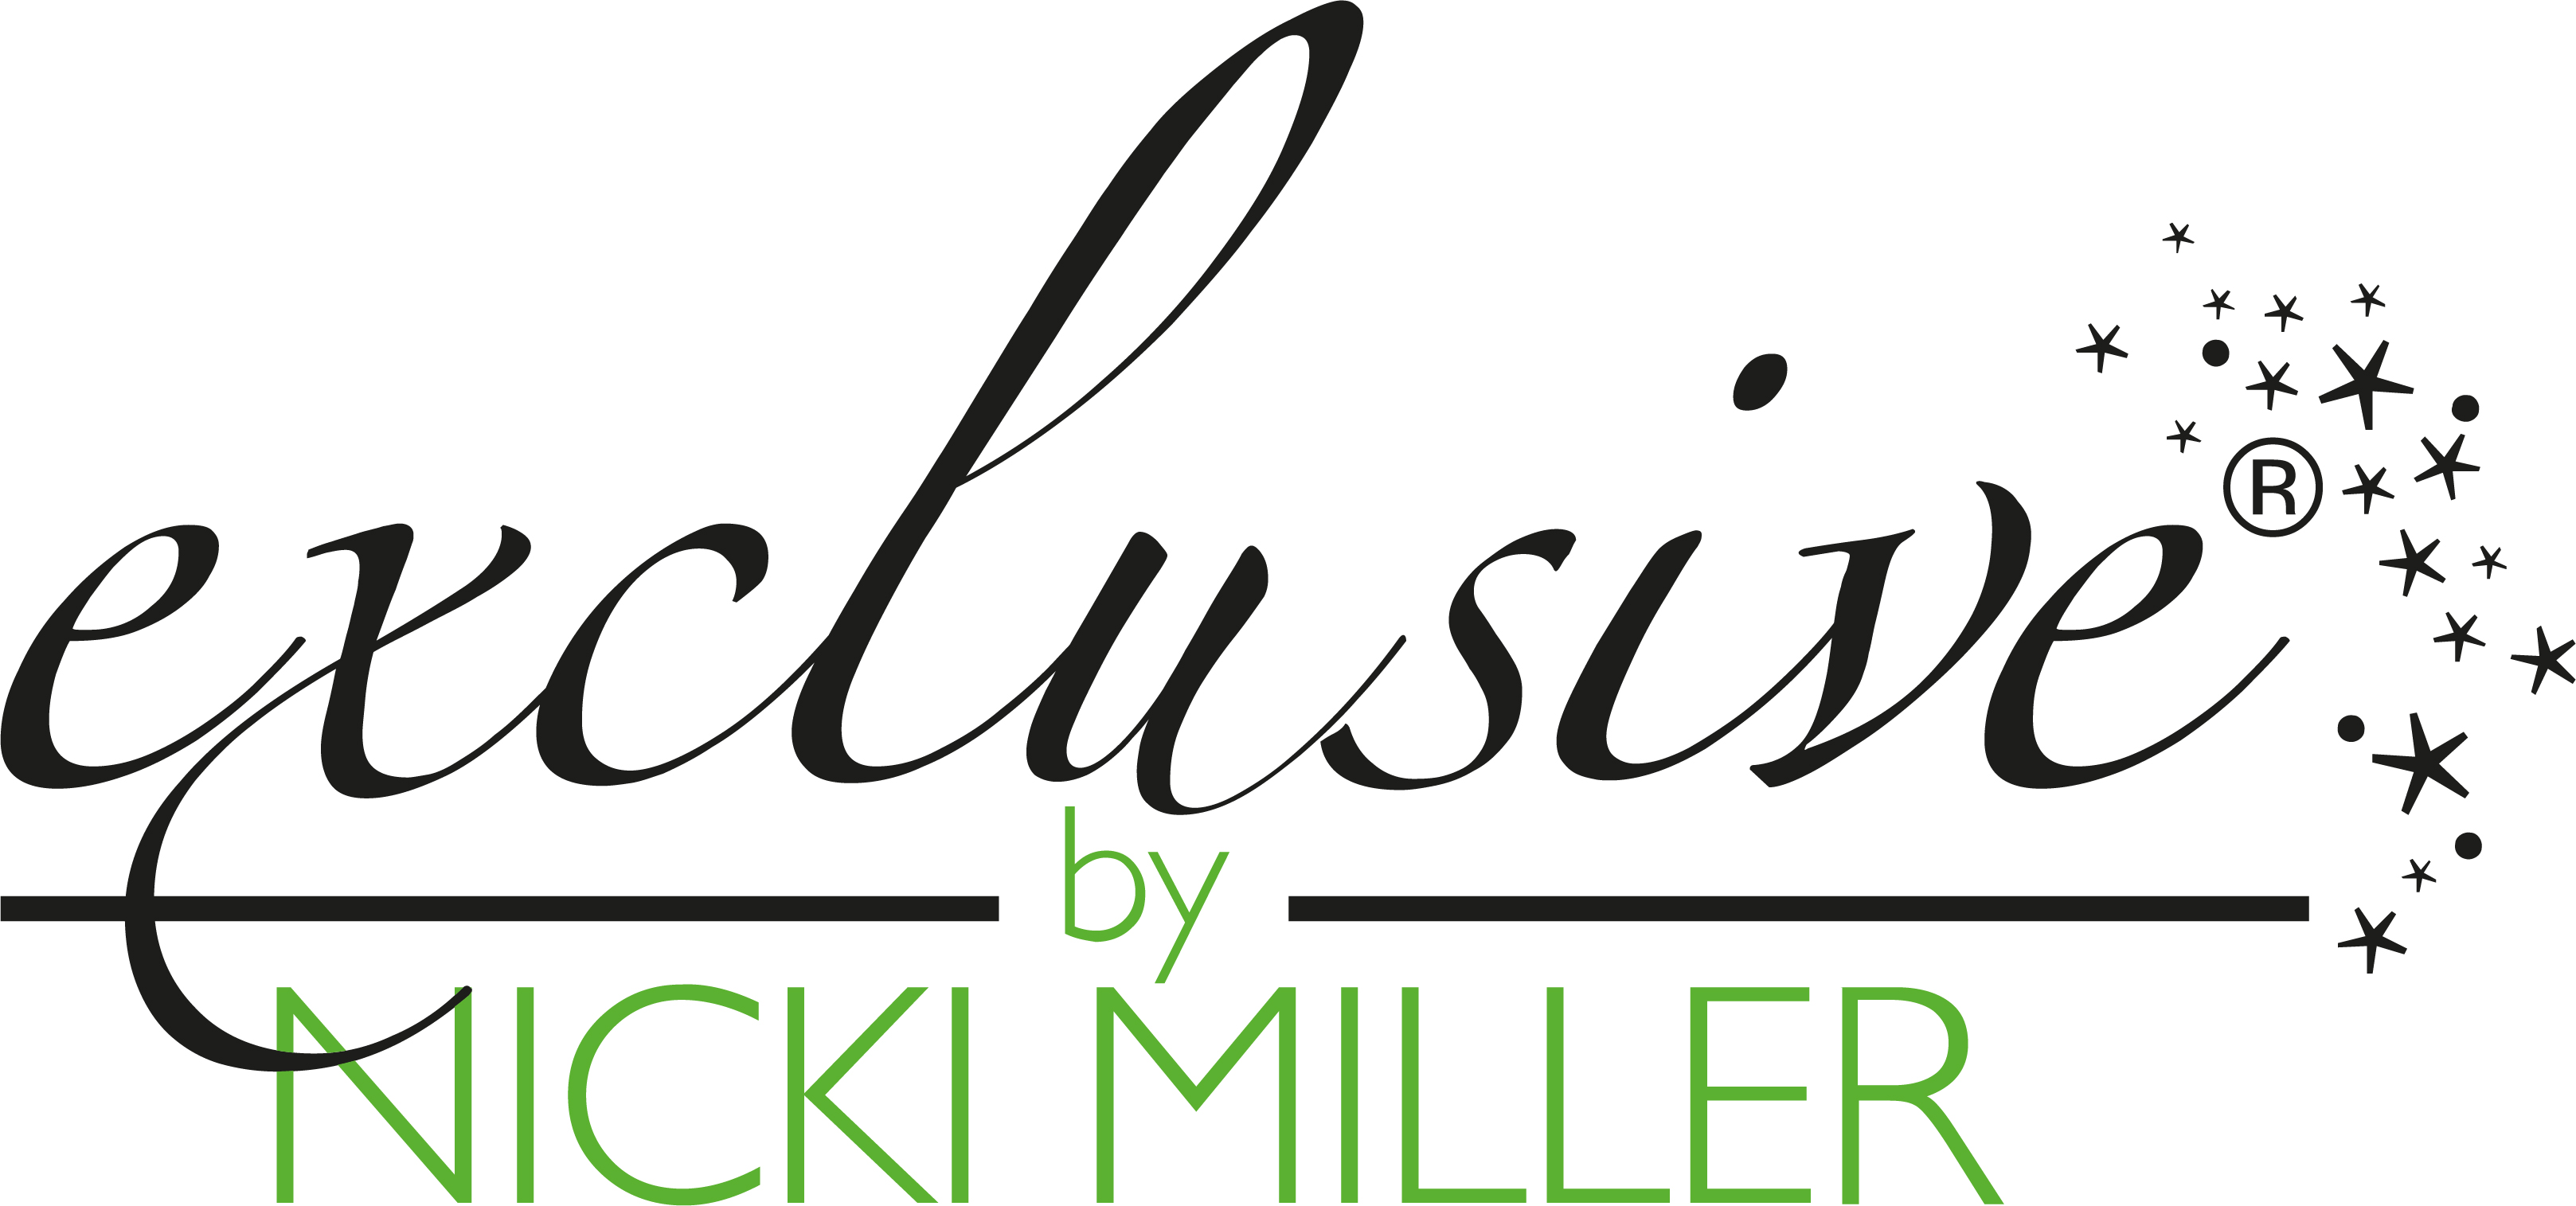 exclusive by Nicki Miller